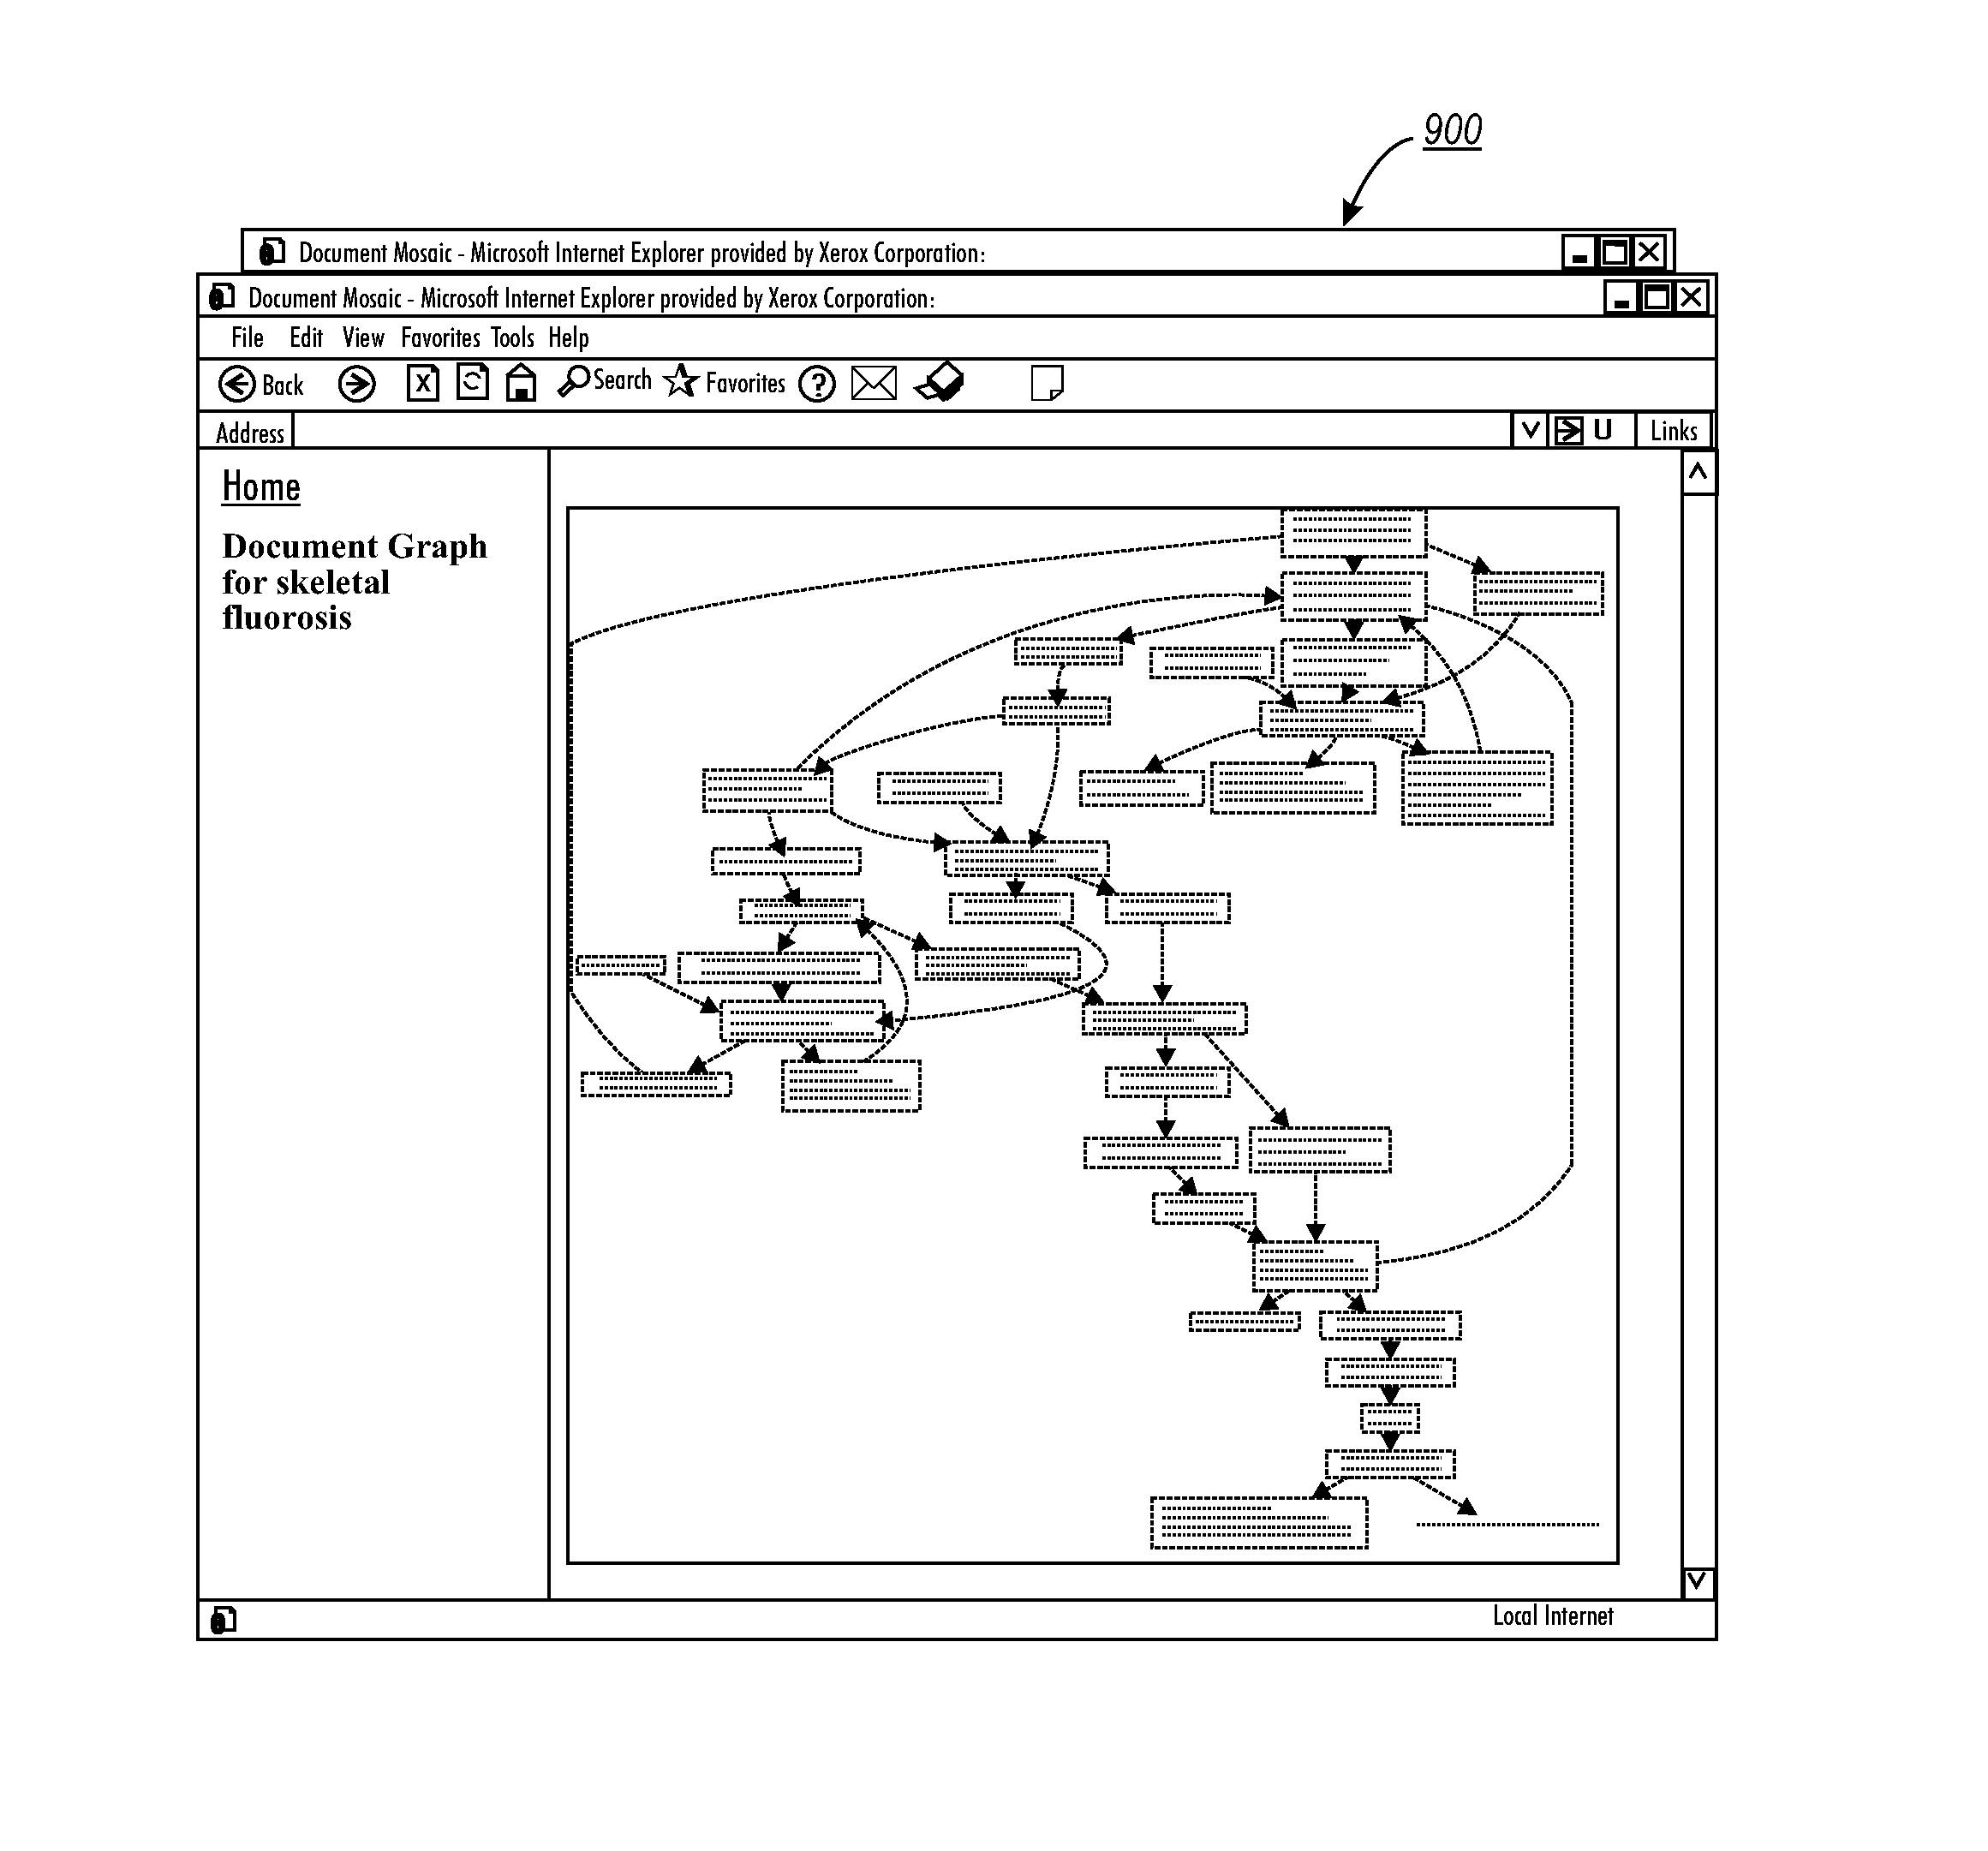 Method and system for constructing a document redundancy graph